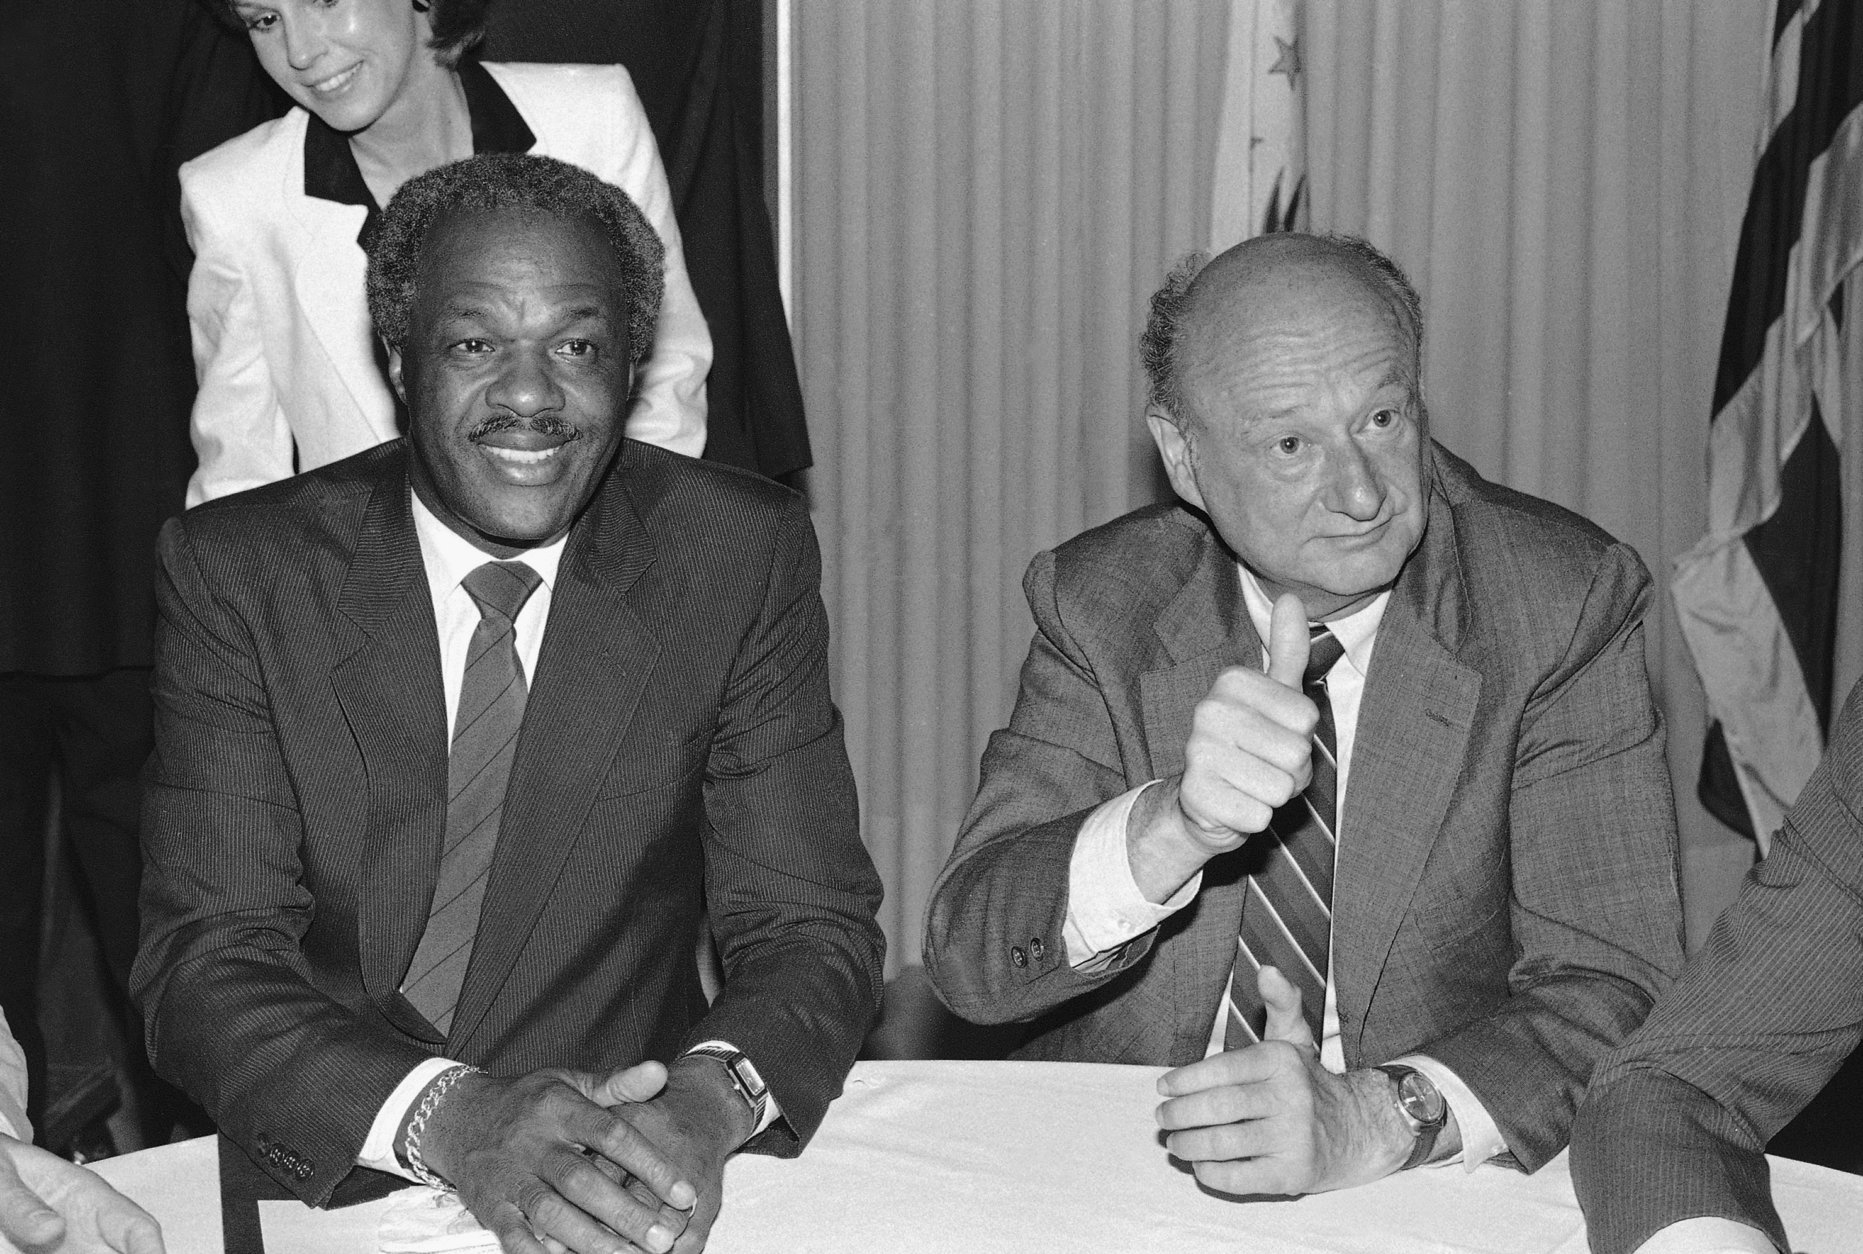 New York Mayor Edward Koch, right, gives the thumbs-up sign as he sits with Washington Mayor Marion Barry, Monday, July 1, 1985 at the National Press Club in Washington. The men were at the Press Club for a gala salute to the National Press Club/Washington press Club merger party. (AP Photo/Ken Heinen)